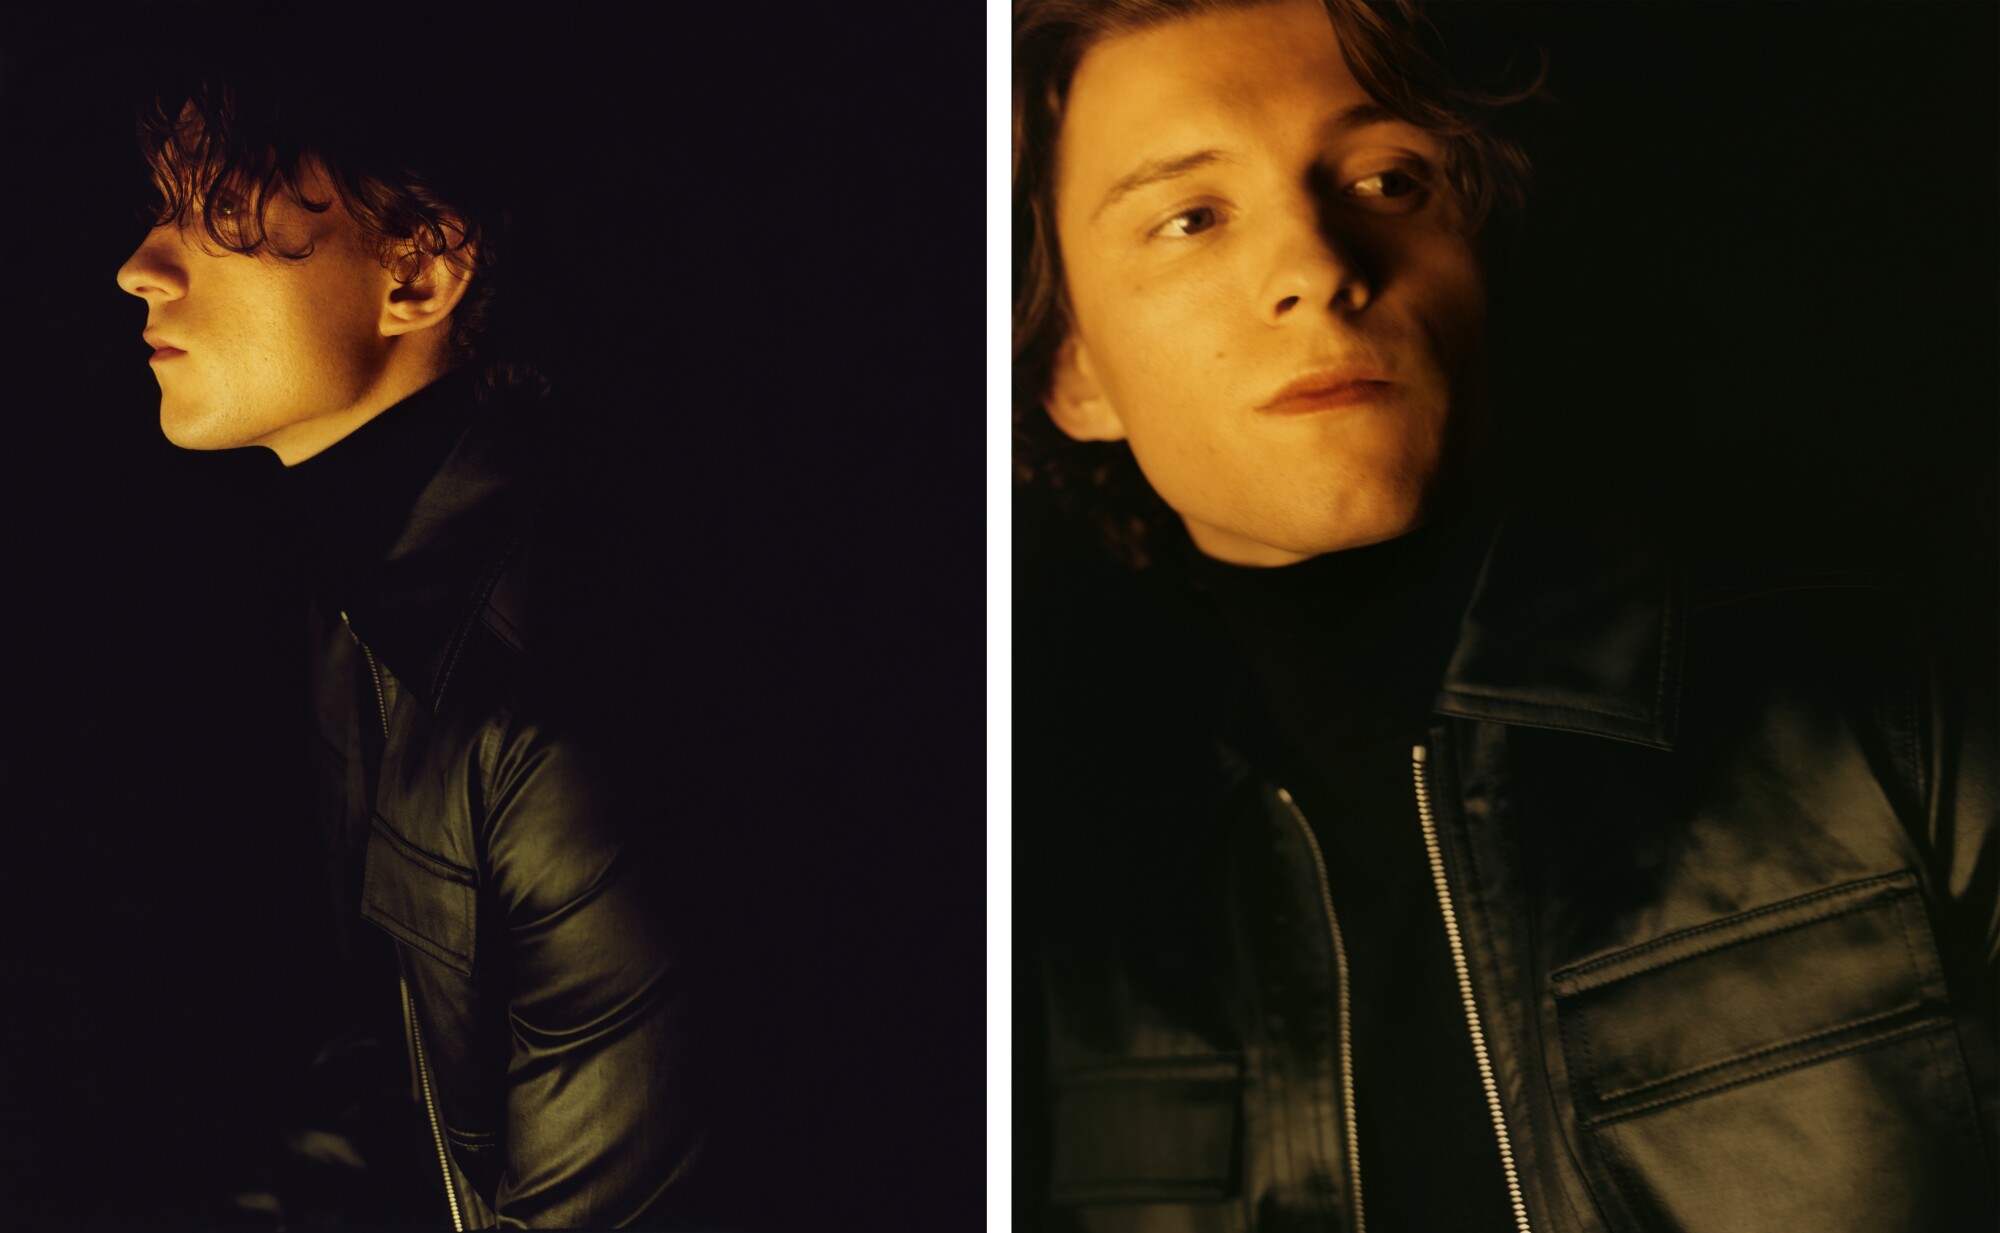 Two side-by-side portraits of Tom Holland in a black leather jacket.